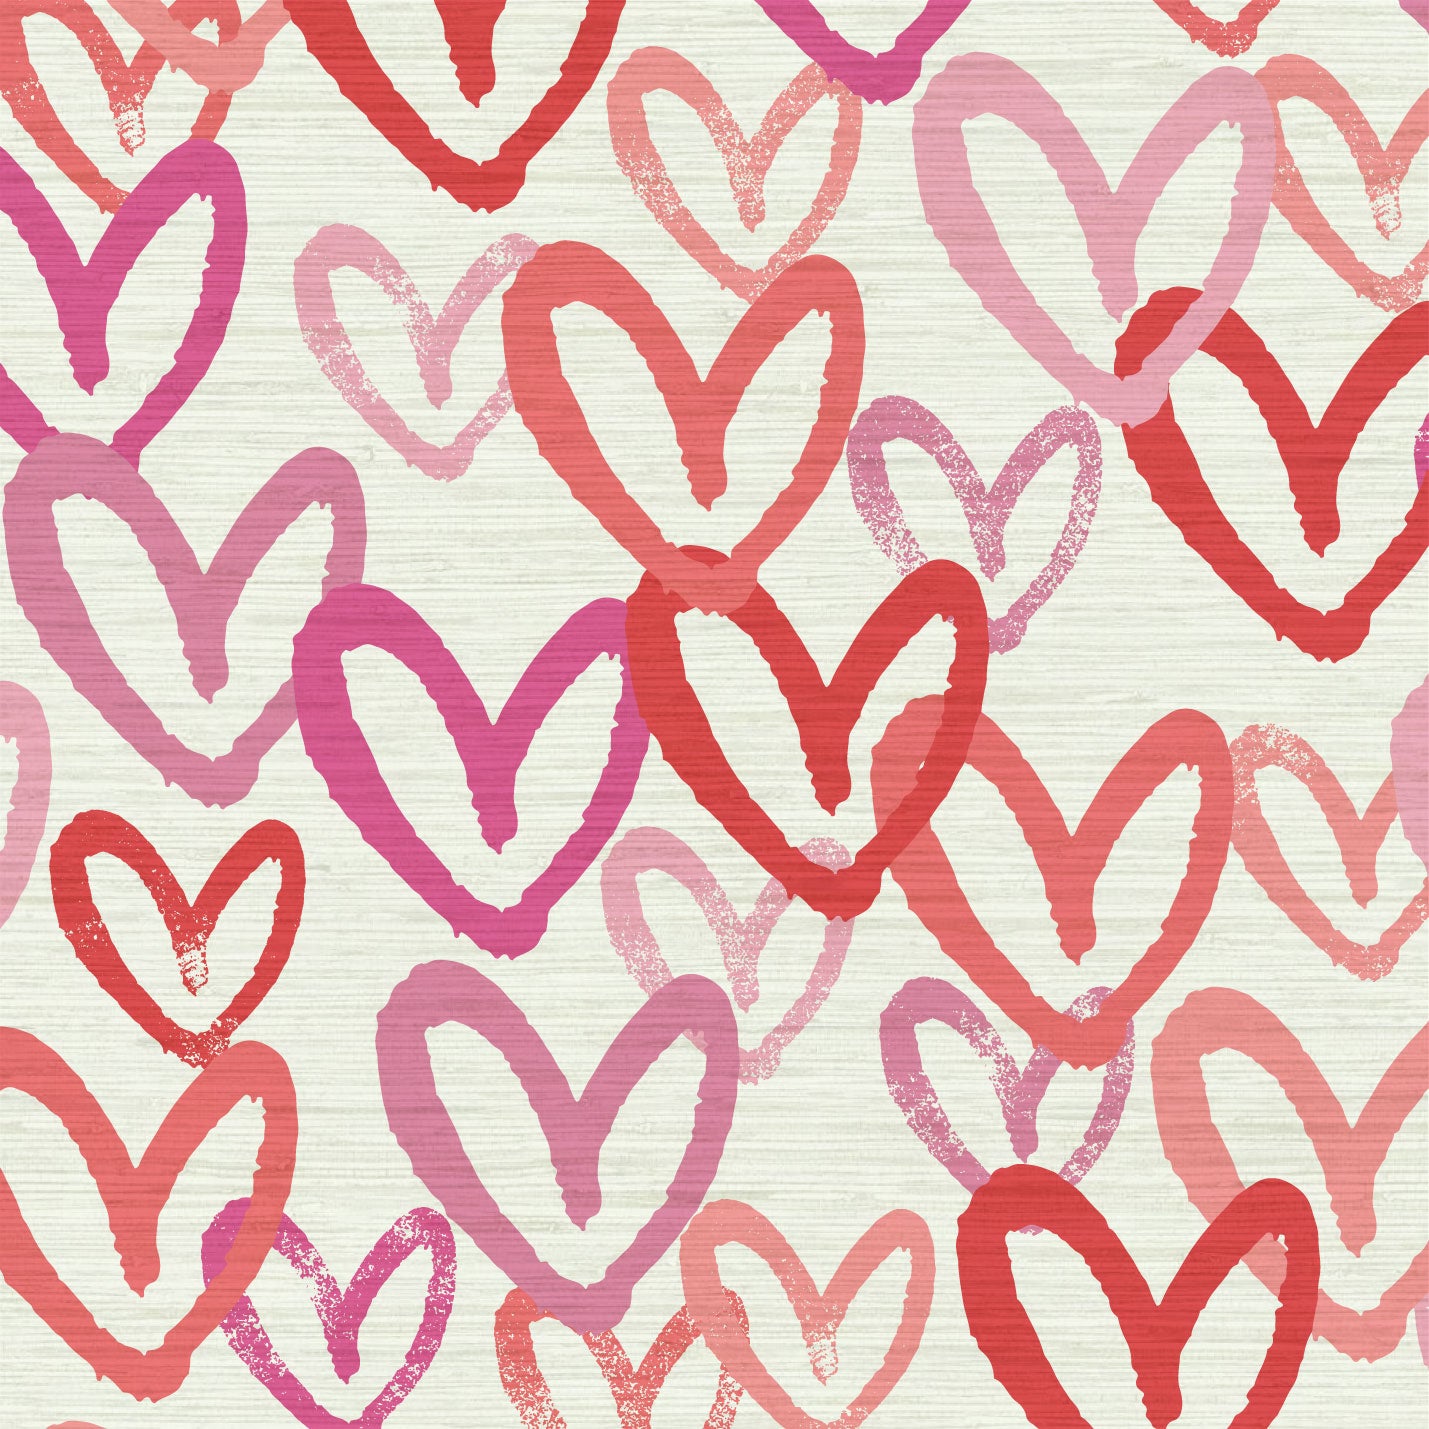 Printed grasscloth wallpaper in allover oversized layered heart print great for kids bedrooms and playroom for a fun and happy wallpaper print design and decor Natural Textured Eco-Friendly Non-toxic High-quality Sustainable Interior Design Bold Custom Tailor-made Retro chic House of Shan Imperfect heart white rpink hot pink red